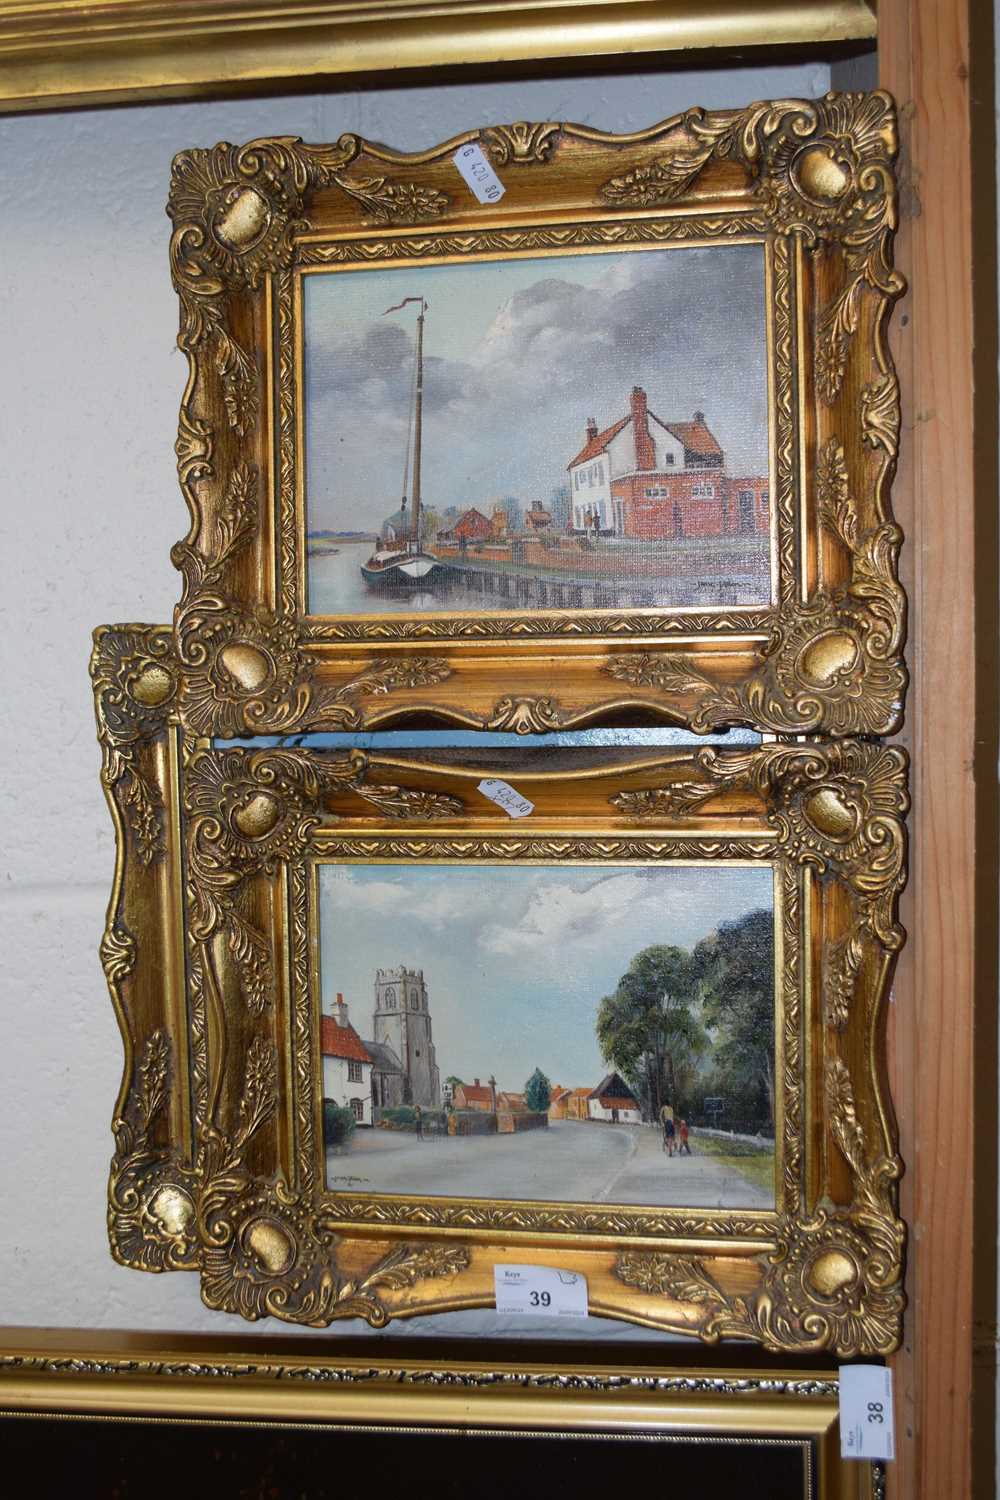 James J Allen, a group of three studies, Stokesby Ferry, Summer at Hemsby, December at Thurne